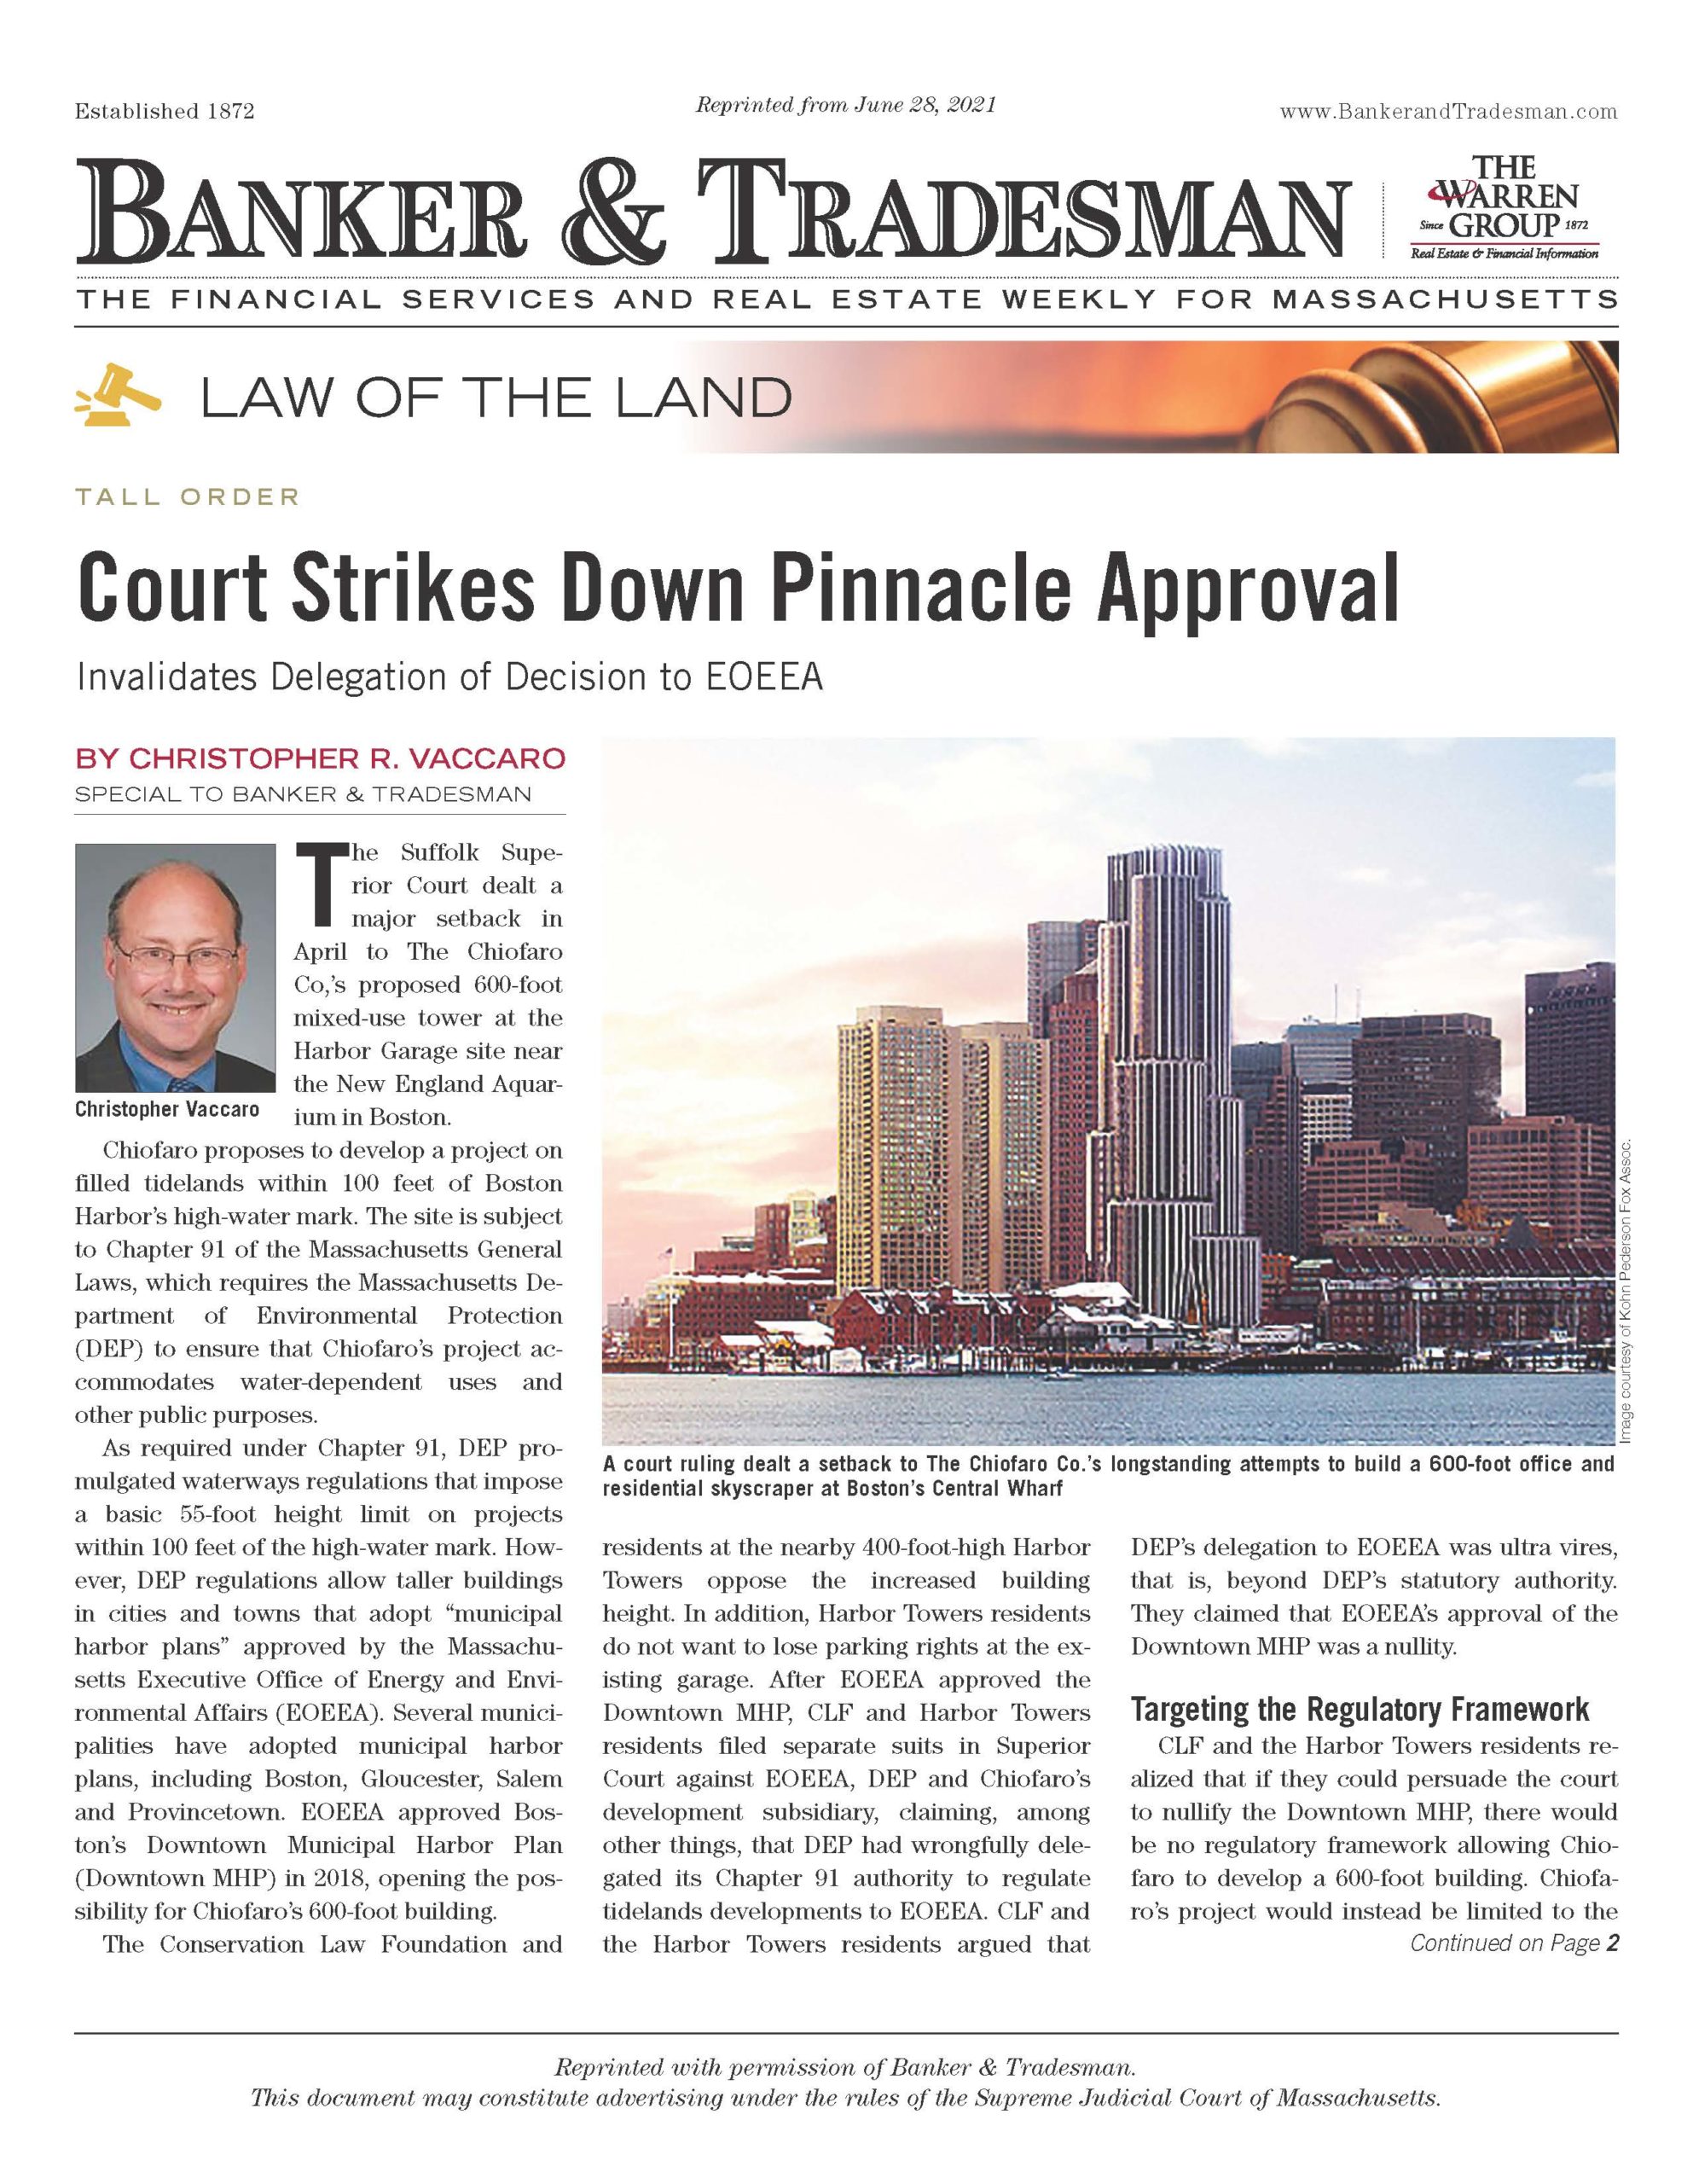 Court Strikes Down Pinnacle Approval